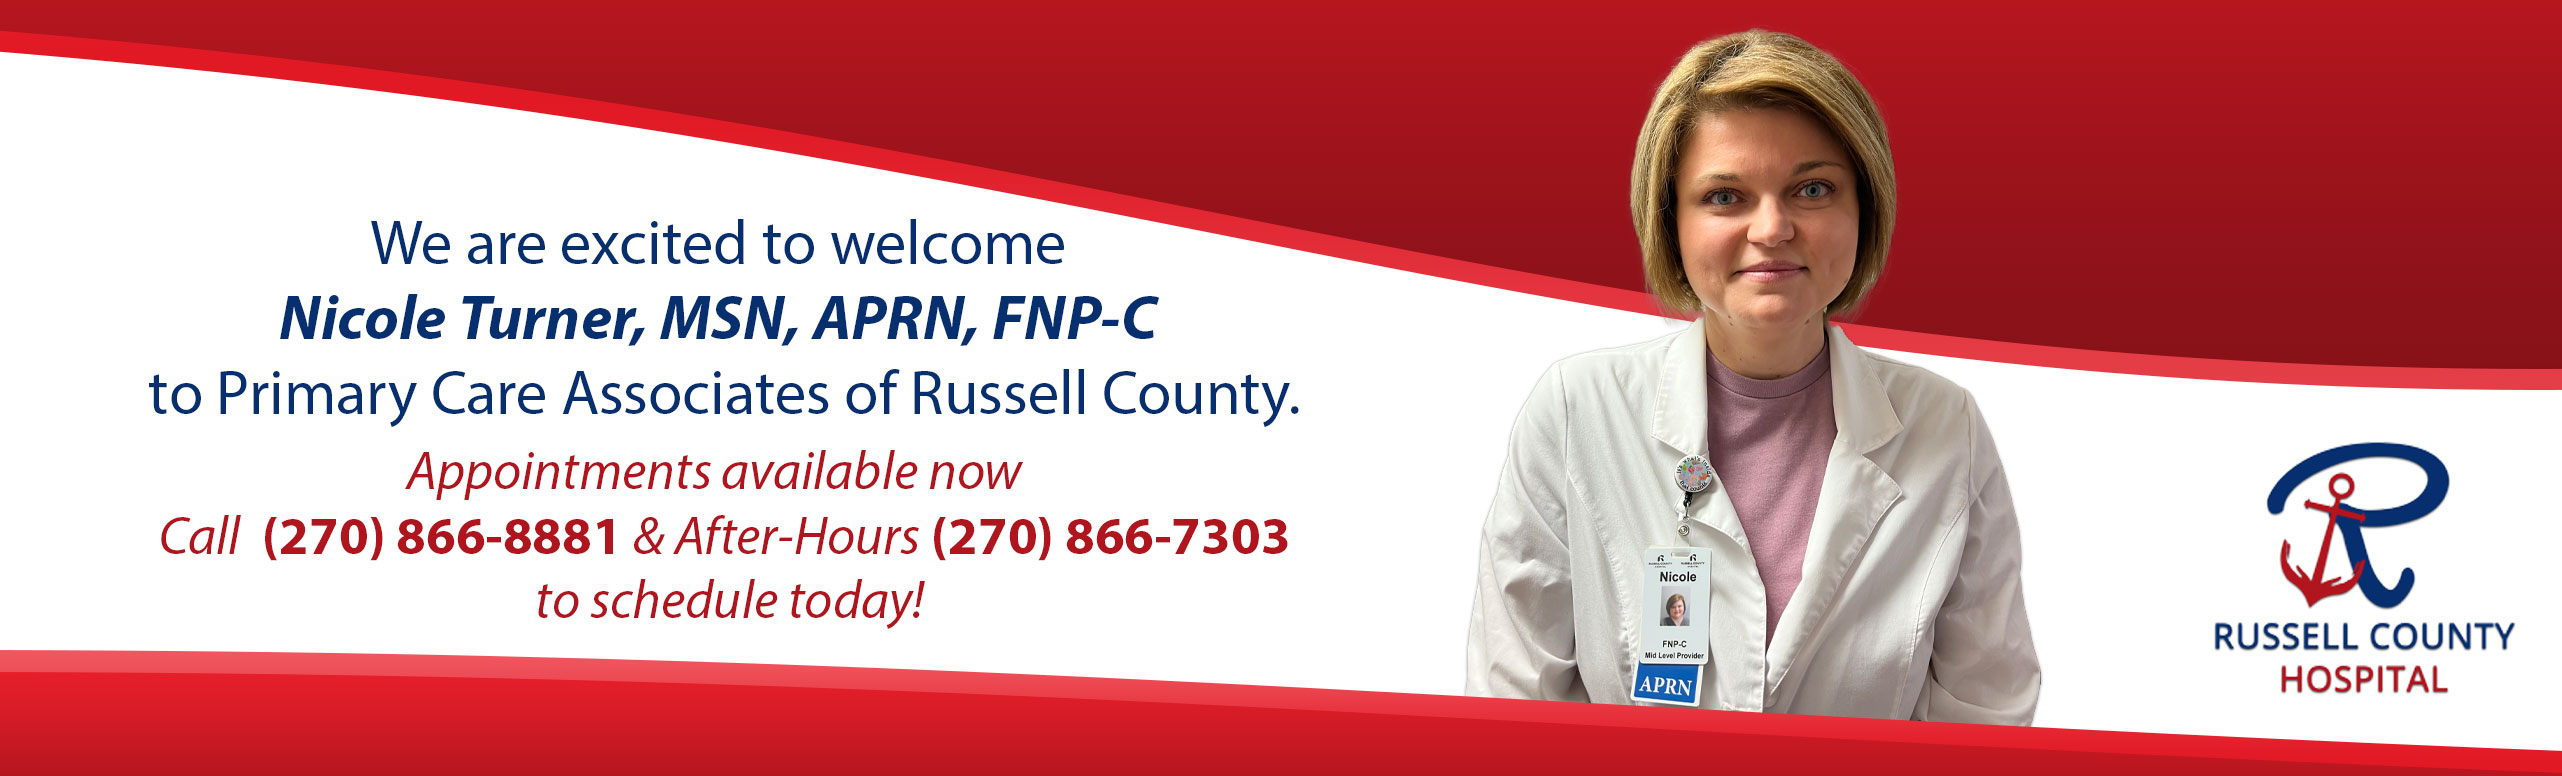 We are excited to welcome Nicole Turner, MSN, APRN, FNP-C, to Primary Care Associates of Russell County. Appointments available now
Call (270) 866-8881 & After-Hours (270) 866-7303 to schedule today!

RUSSELL COUNTY HOSPITAL